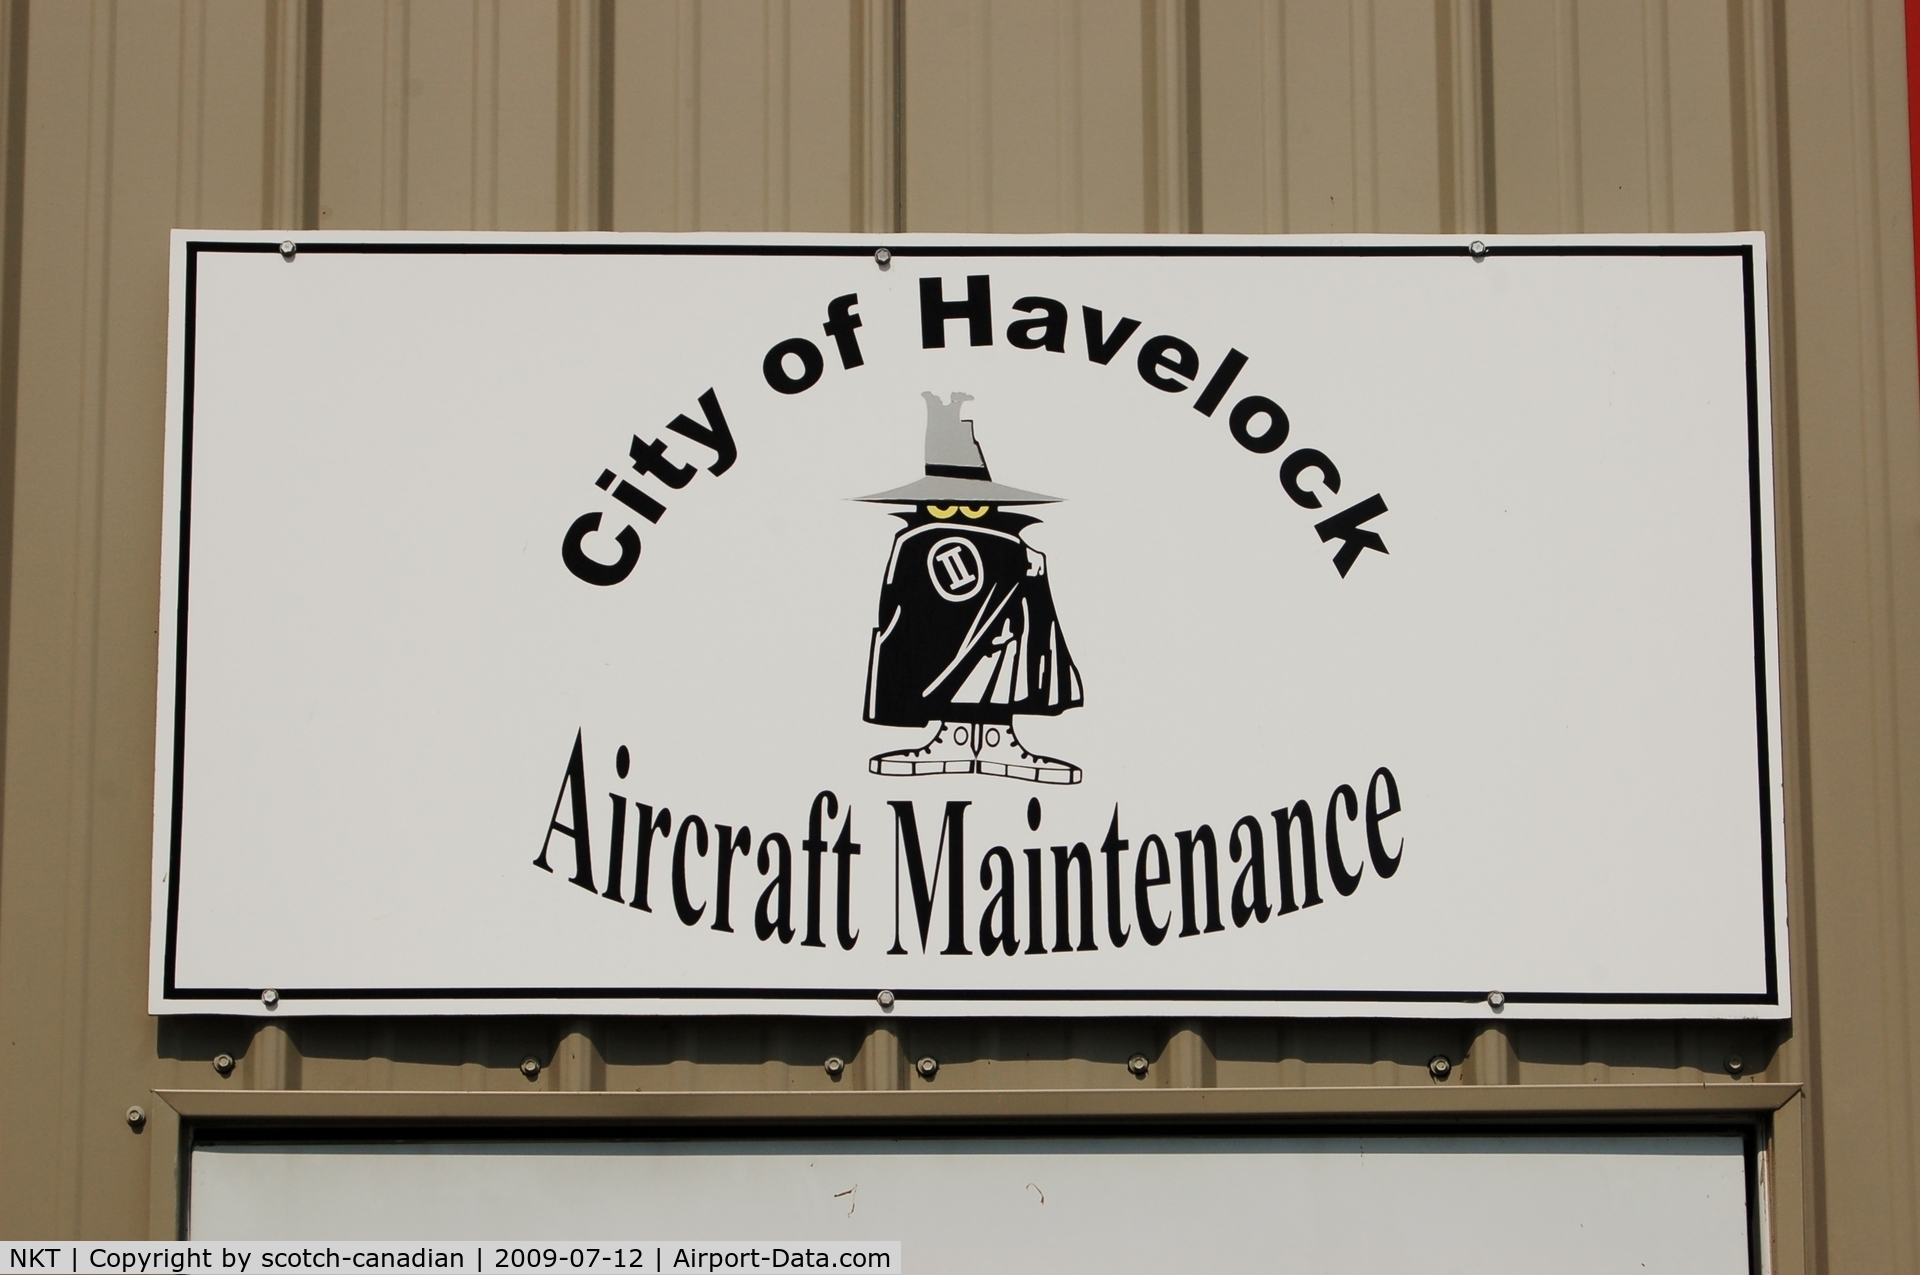 Cherry Point Mcas /cunningham Field/ Airport (NKT) - Sign on the Aircraft Maintenance Building at the Havelock Tourist & Event Center, Havelock, NC